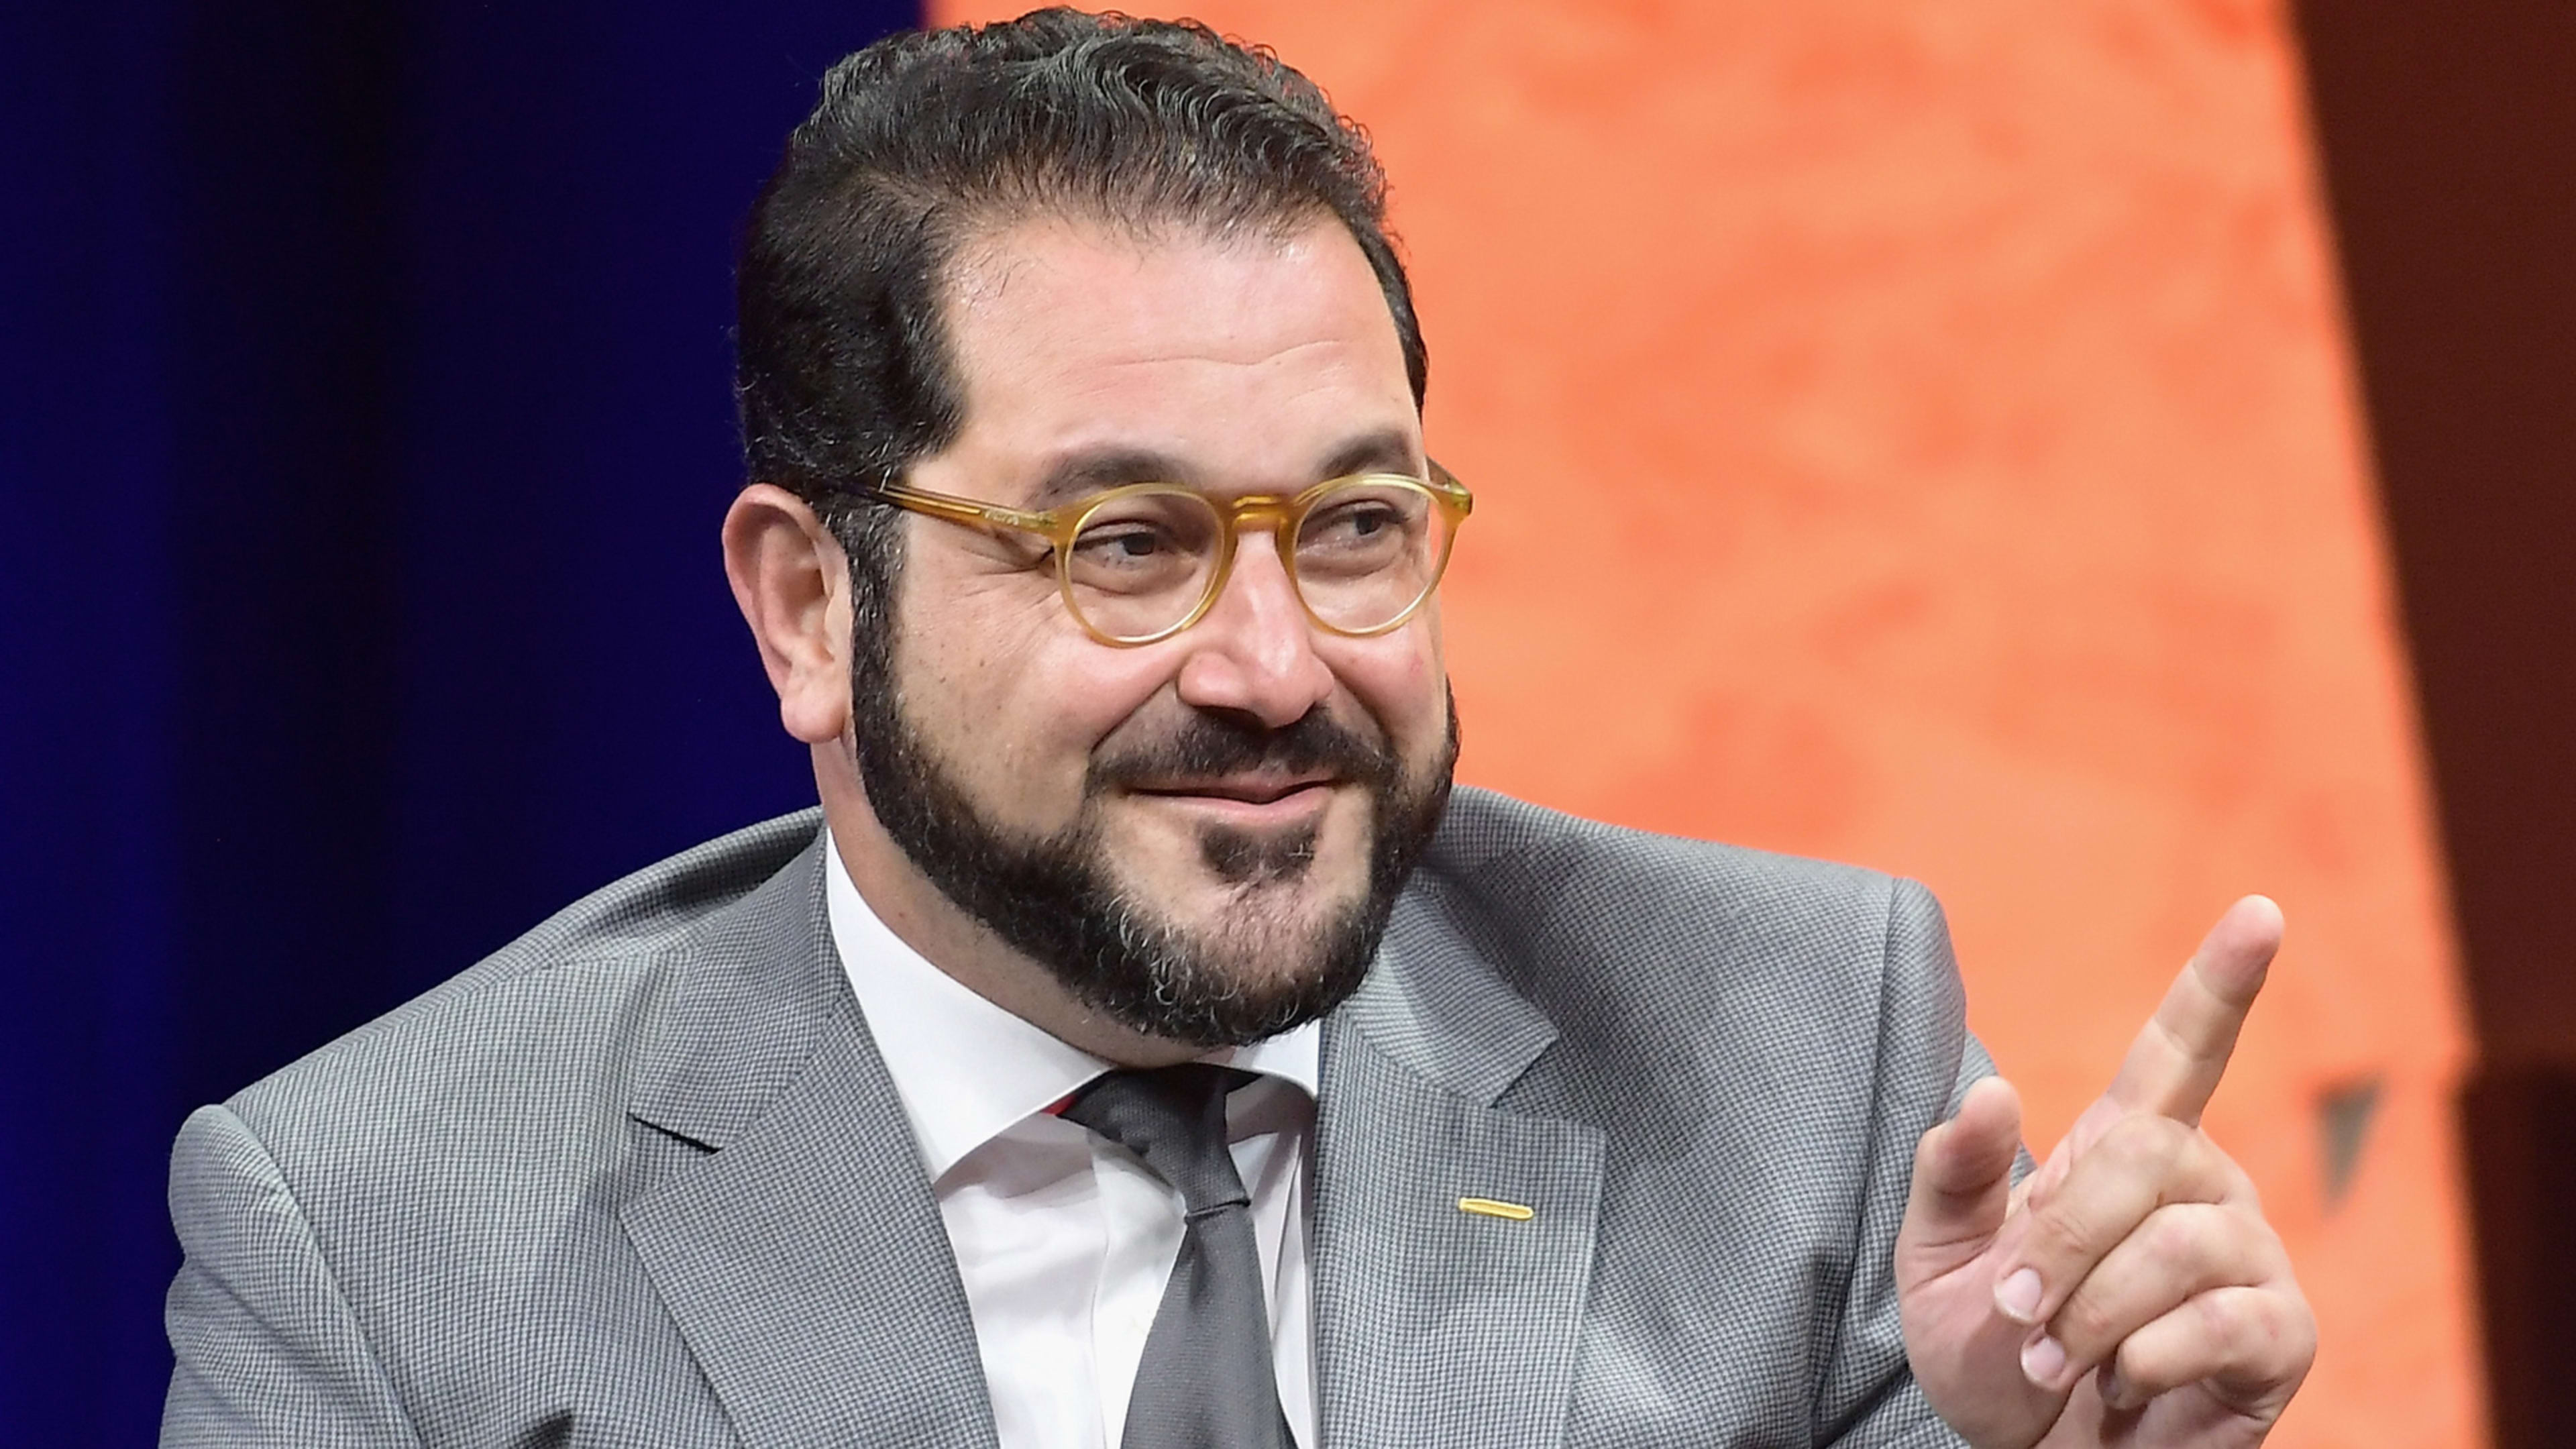 With a dramatic flair, Shervin Pishevar resigns from Sherpa Capital amid allegations